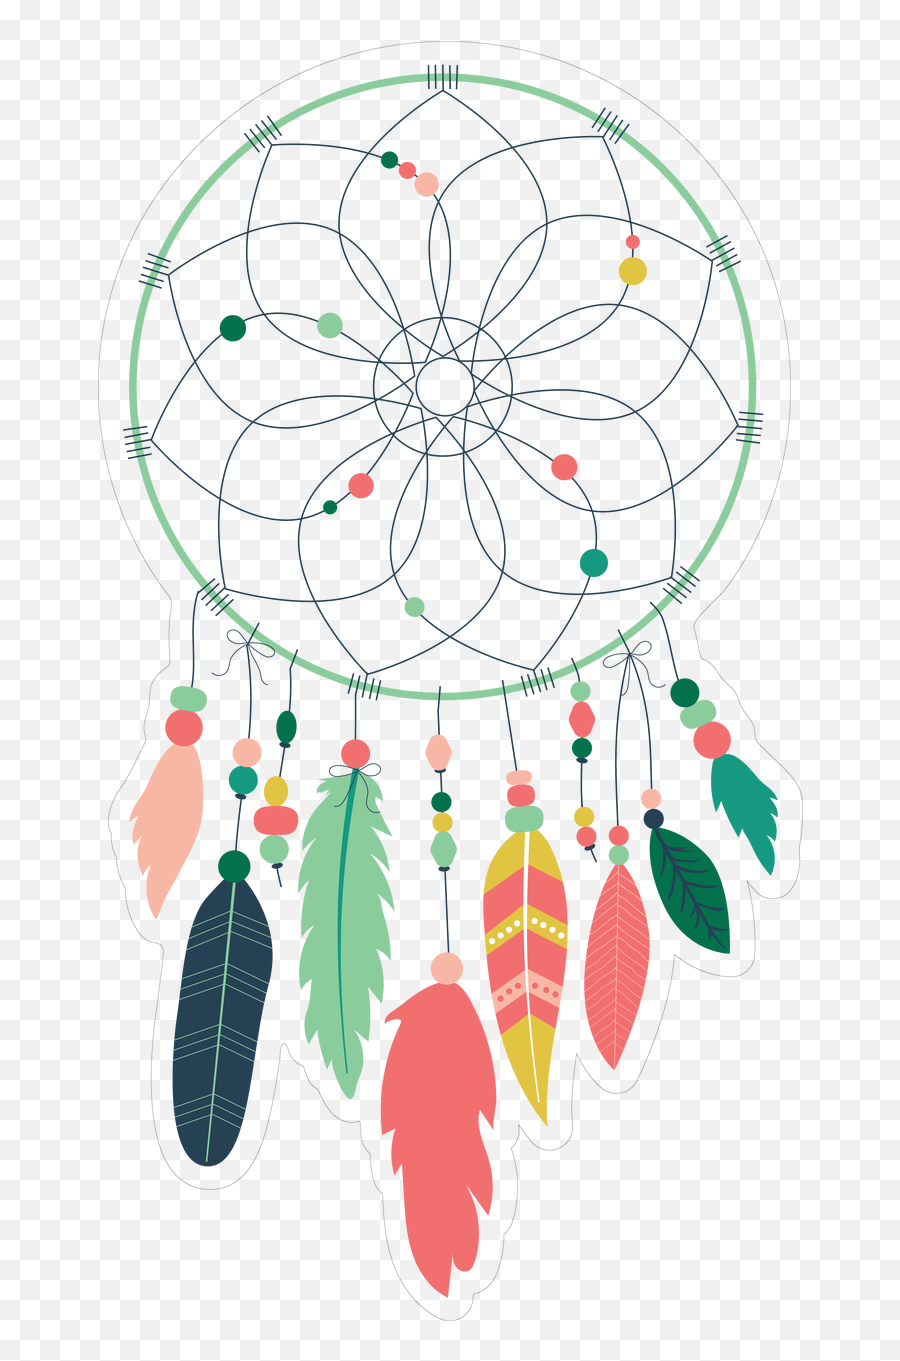 Silhouette Dream Catcher Png Image With - Clipart Dream Catcher,Dream Catcher Png